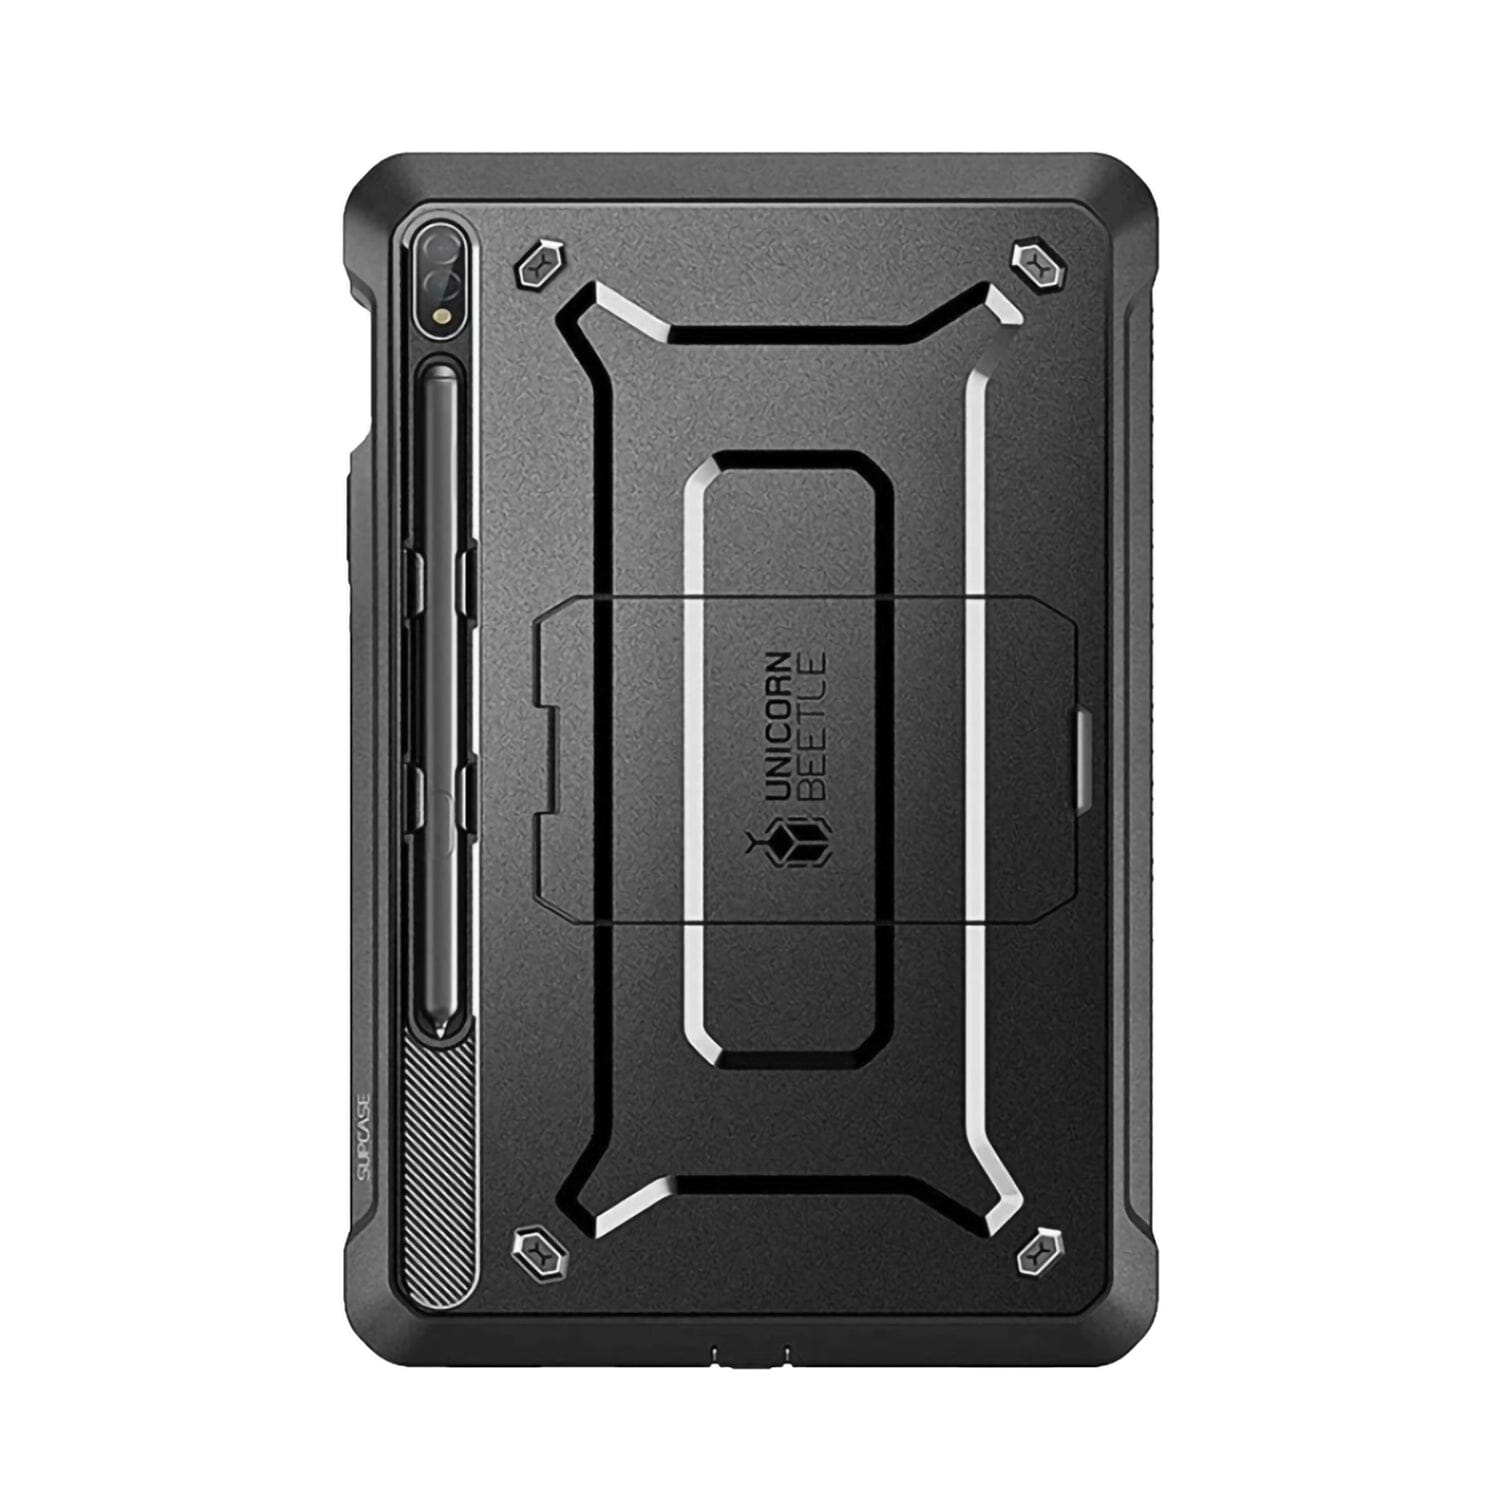 Supcase Unicorn Beetle Pro Series Full-Body Rugged Case with Kickstand for Samsung Galaxy Tab S7/S7+(2020)12.4", Black Default Supcase 